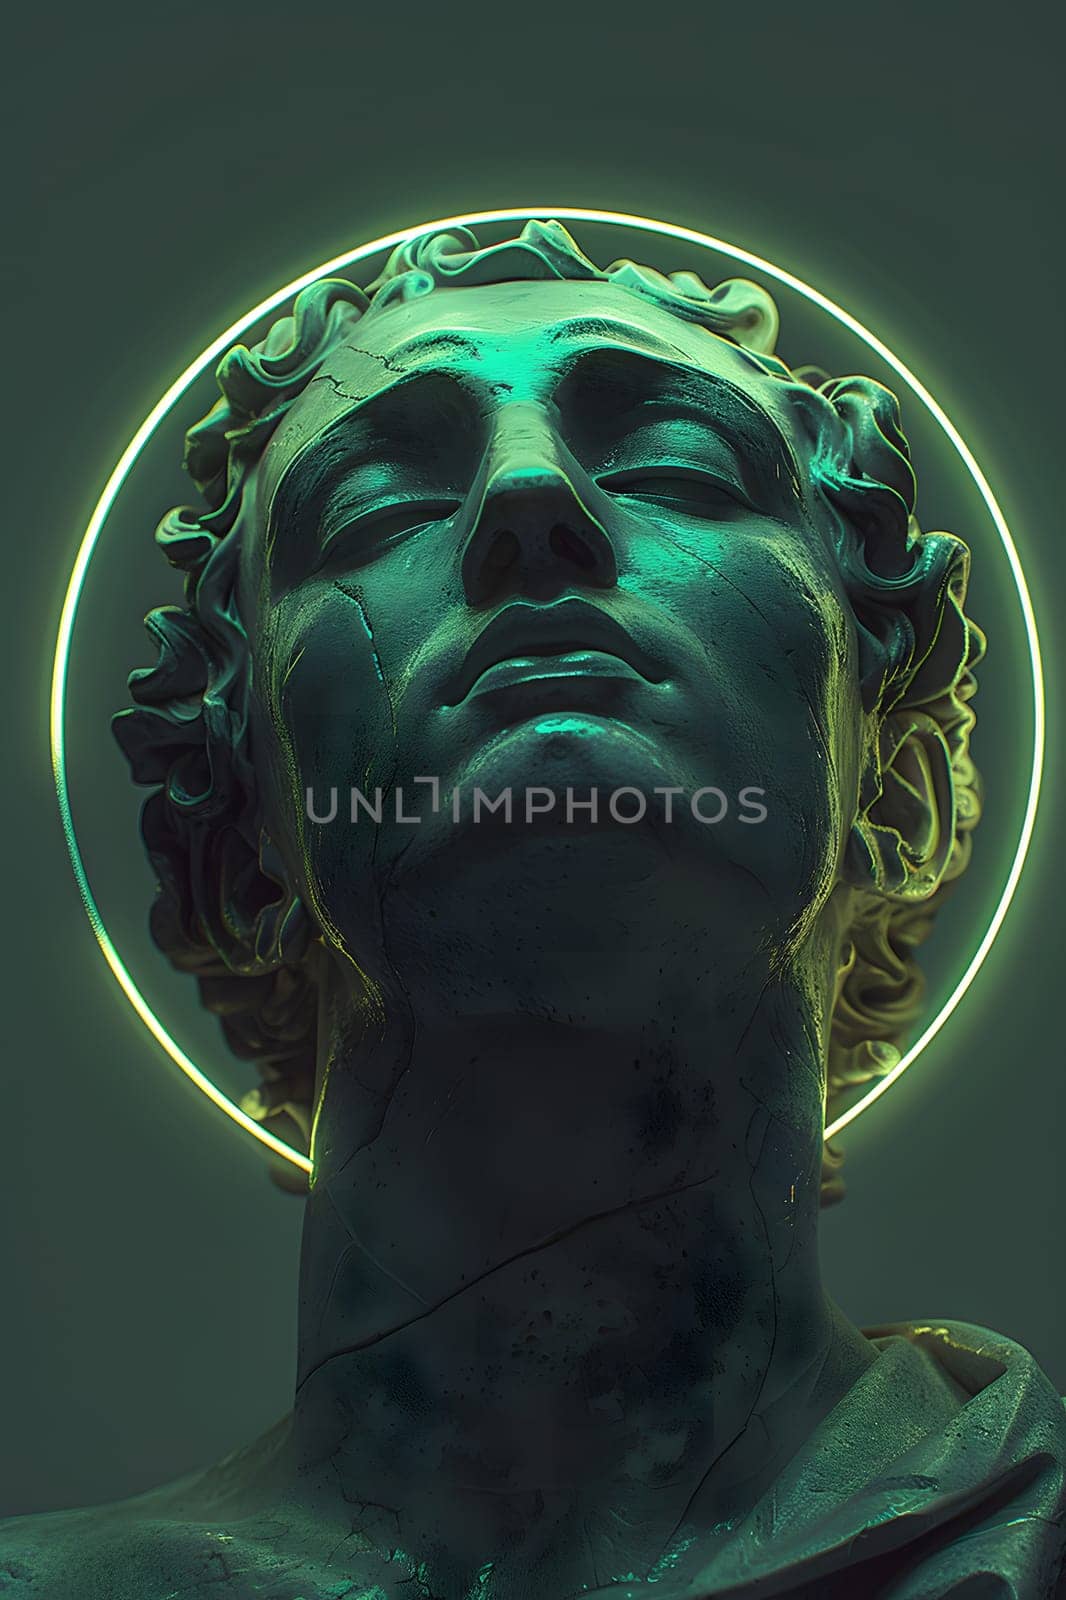 An intricate sculpture of a man in darkness, eyes closed, with a glowing halo around his head in electric blue. The metal artifact showcases perfect symmetry and a halo in the form of a circle